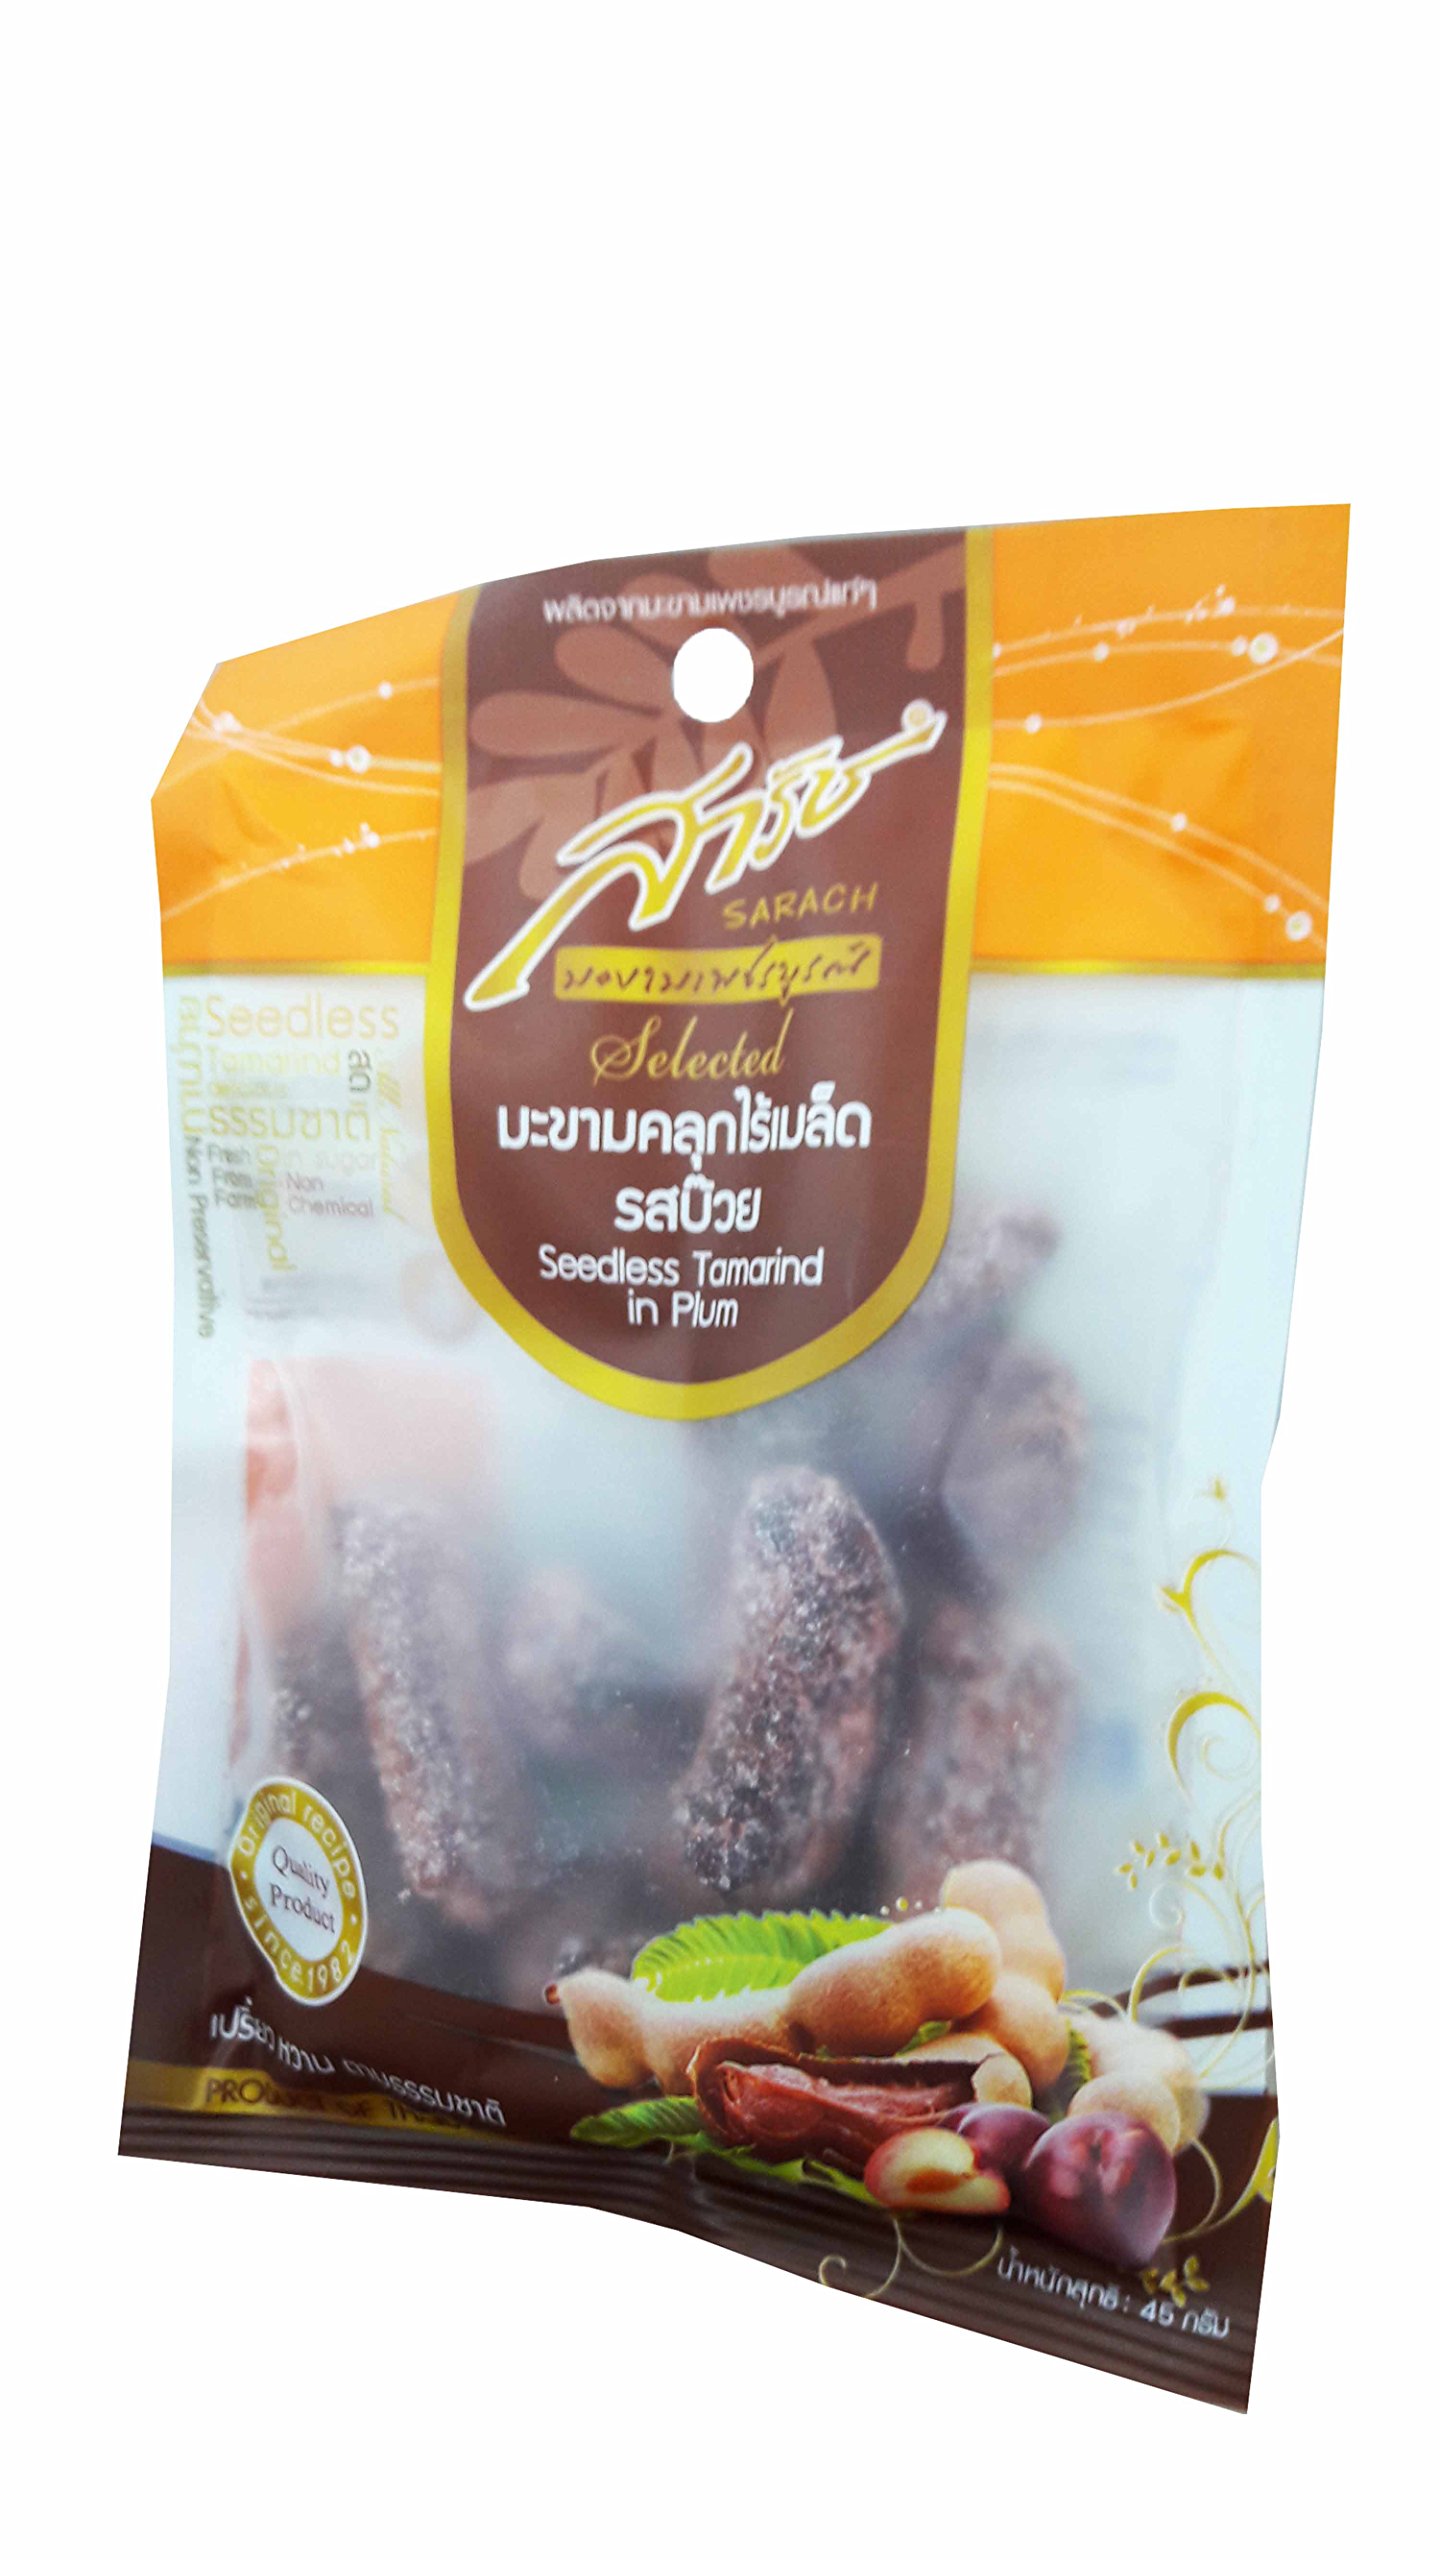 4 Packs of Seedless Tamarind in Plum, Selected Premium Delicious Snack By Sarach From Phetchabun Province, Thailand (45 G./pack)